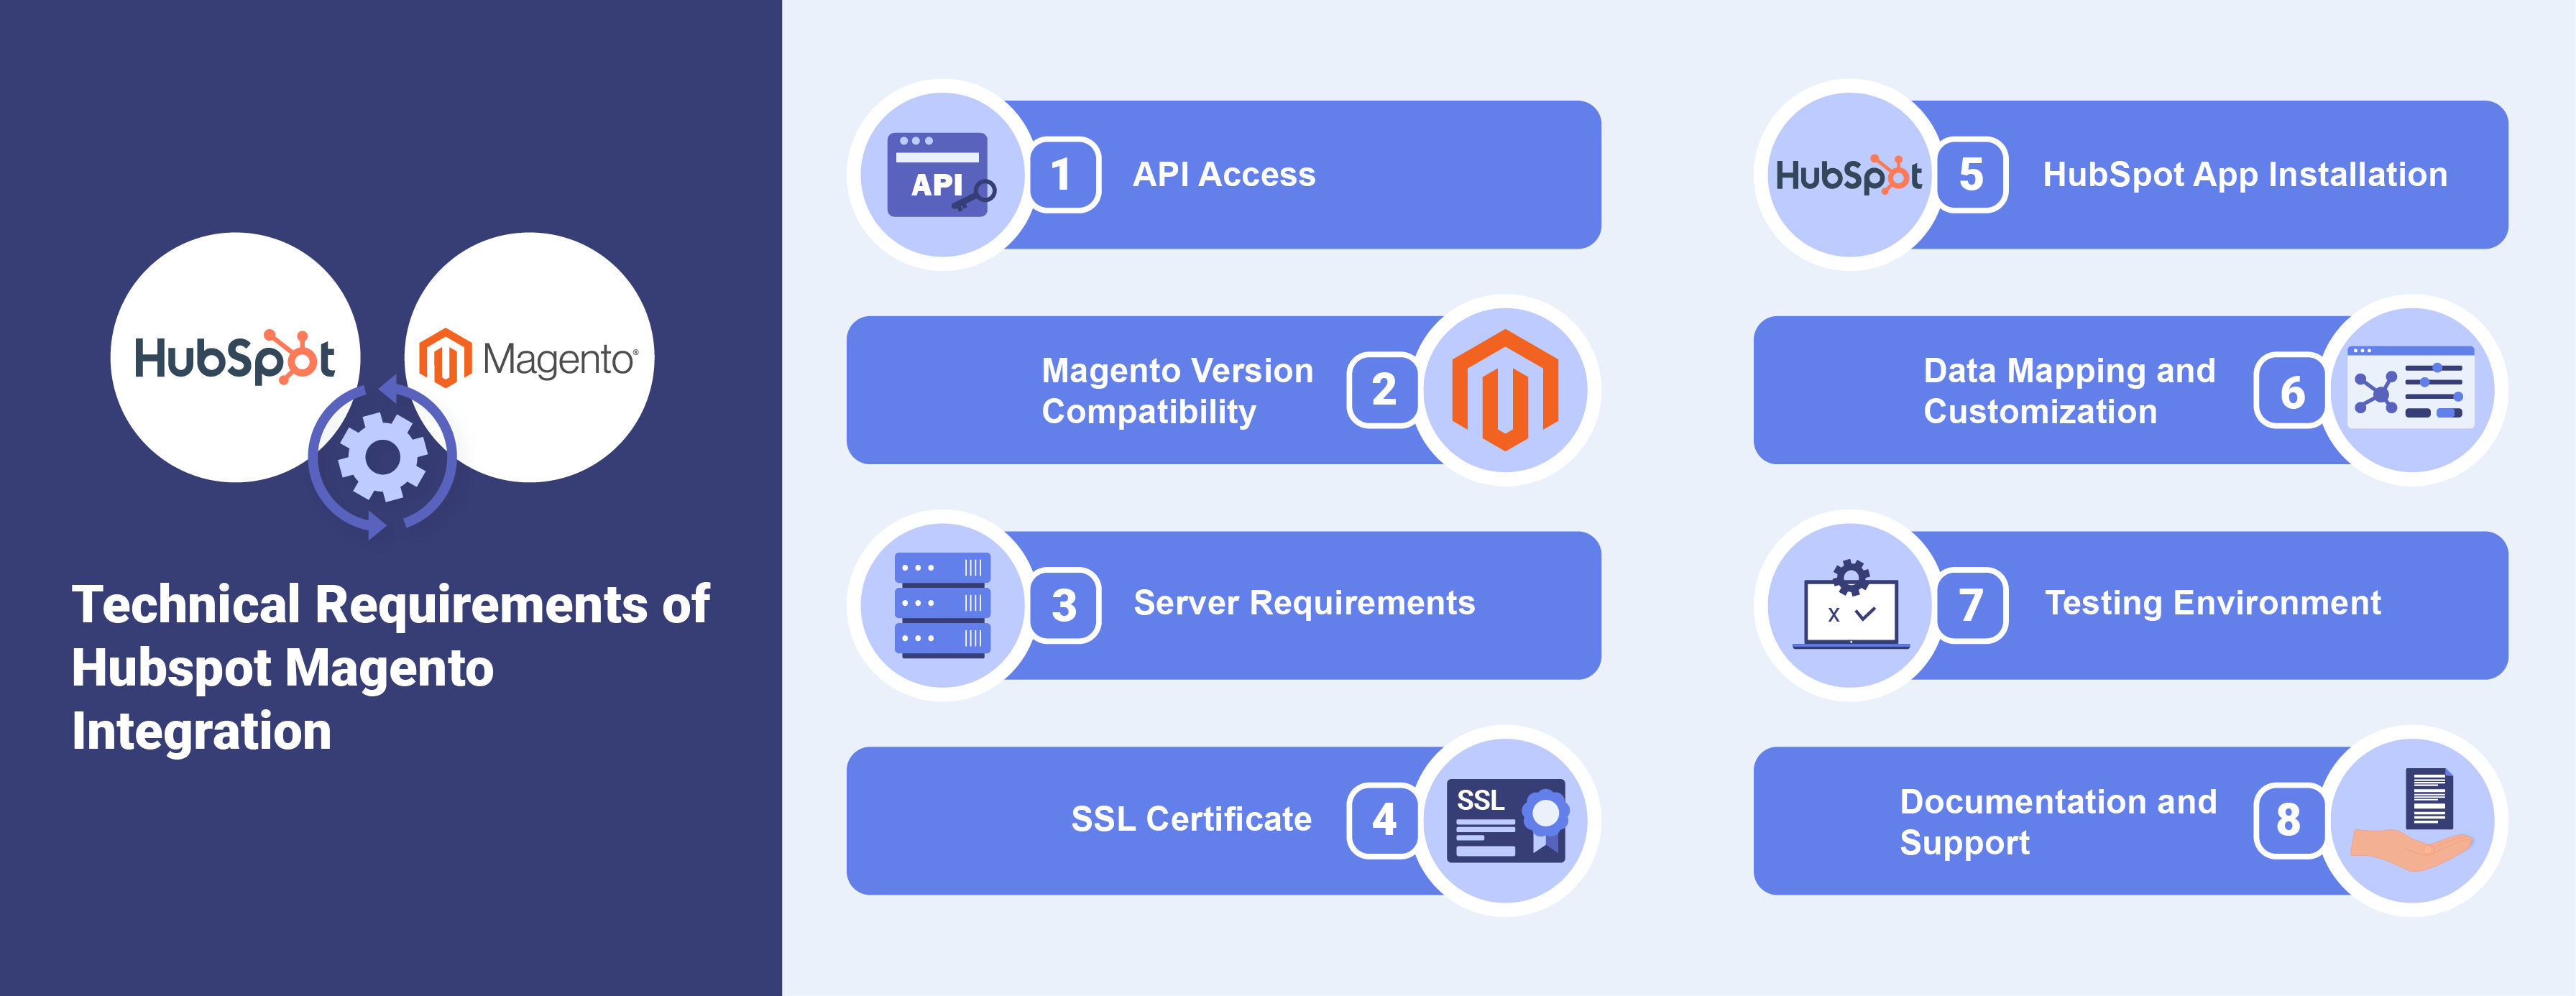 Technical Requirements of Hubspot Magento Integration